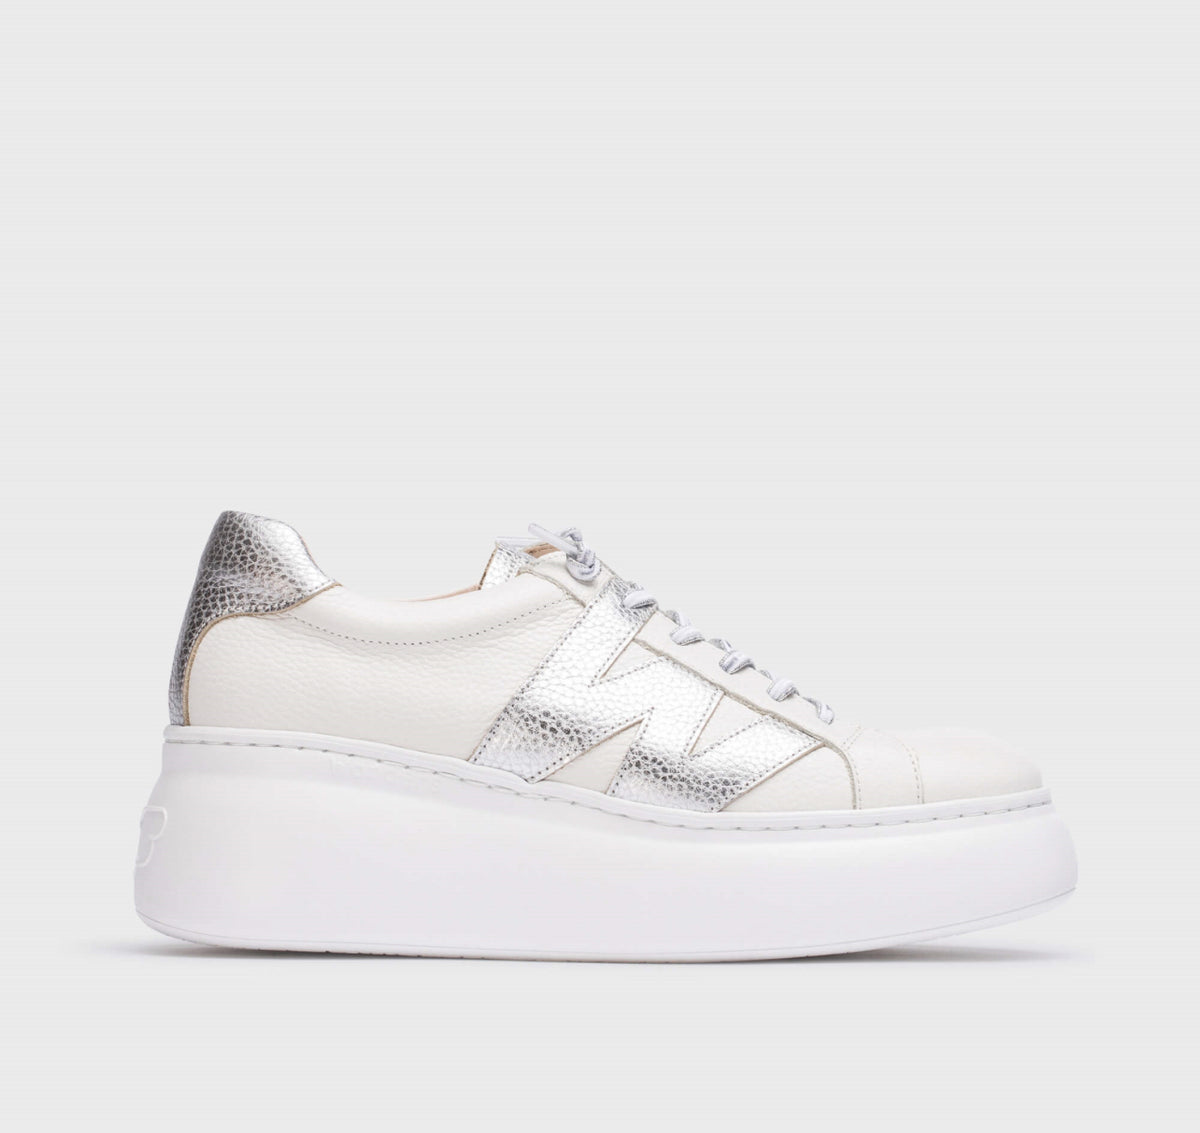 Wonders - A-2650 White and Silver Slip On Trainer